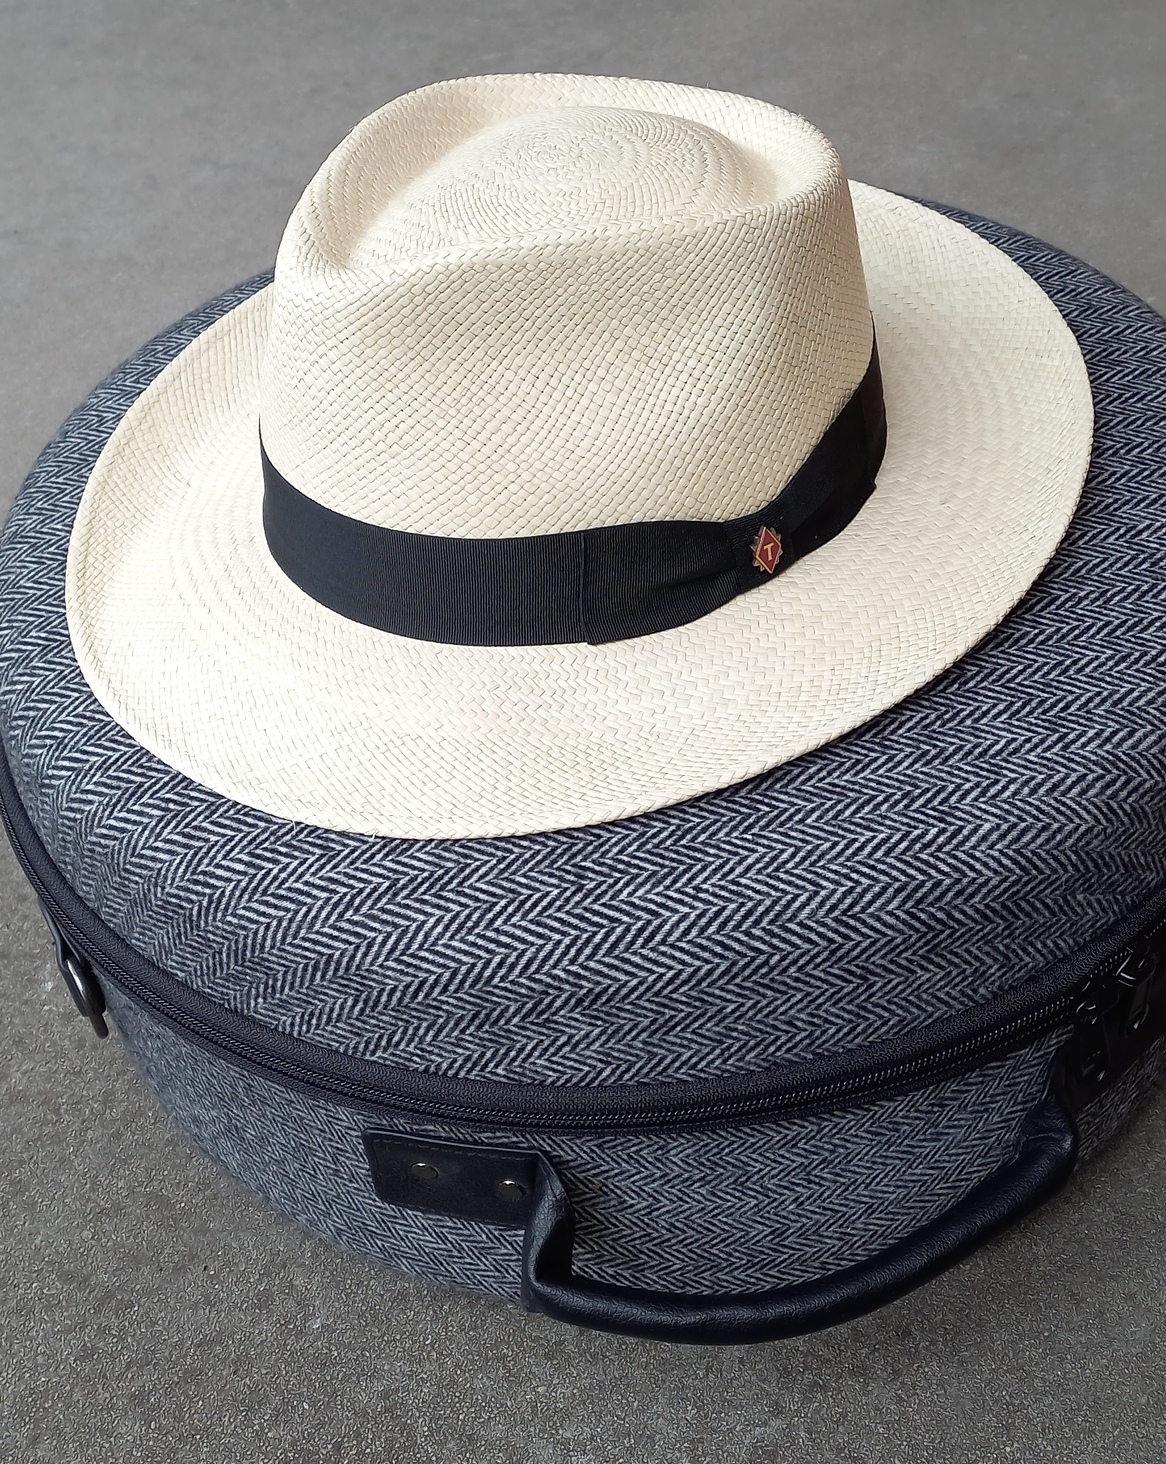 King panama and hat case.jpg